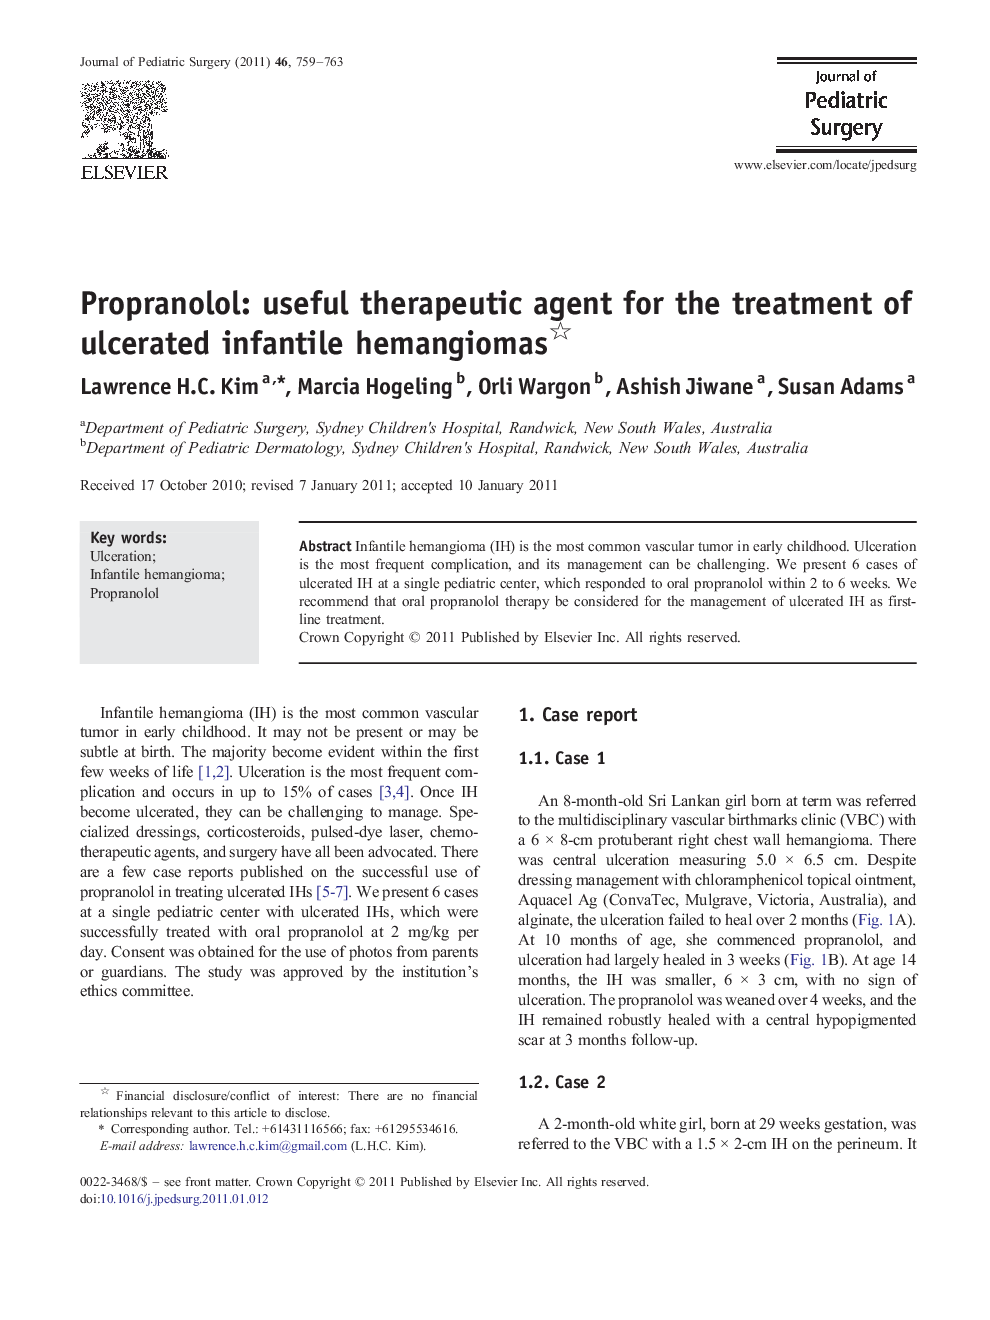 Propranolol: useful therapeutic agent for the treatment of ulcerated infantile hemangiomas